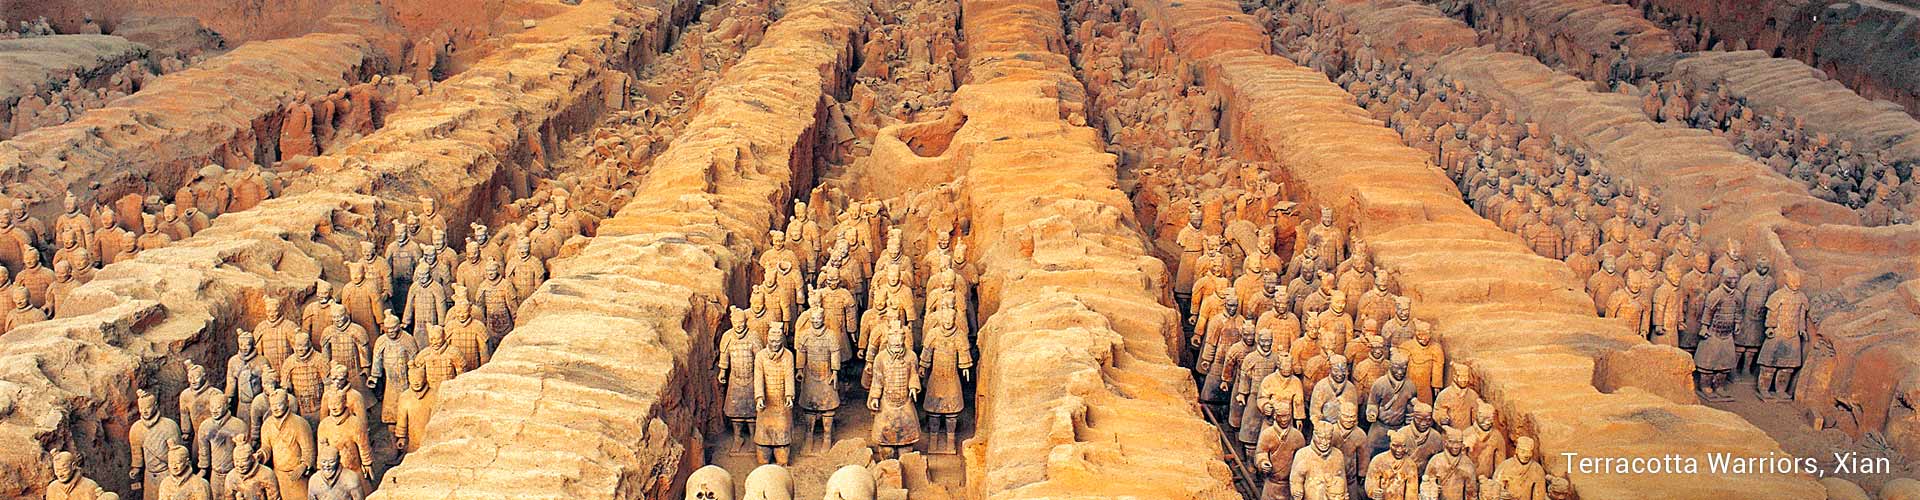 Visit the historical Xian to see the miraculous Terracotta Army and other essence of ancient relics.